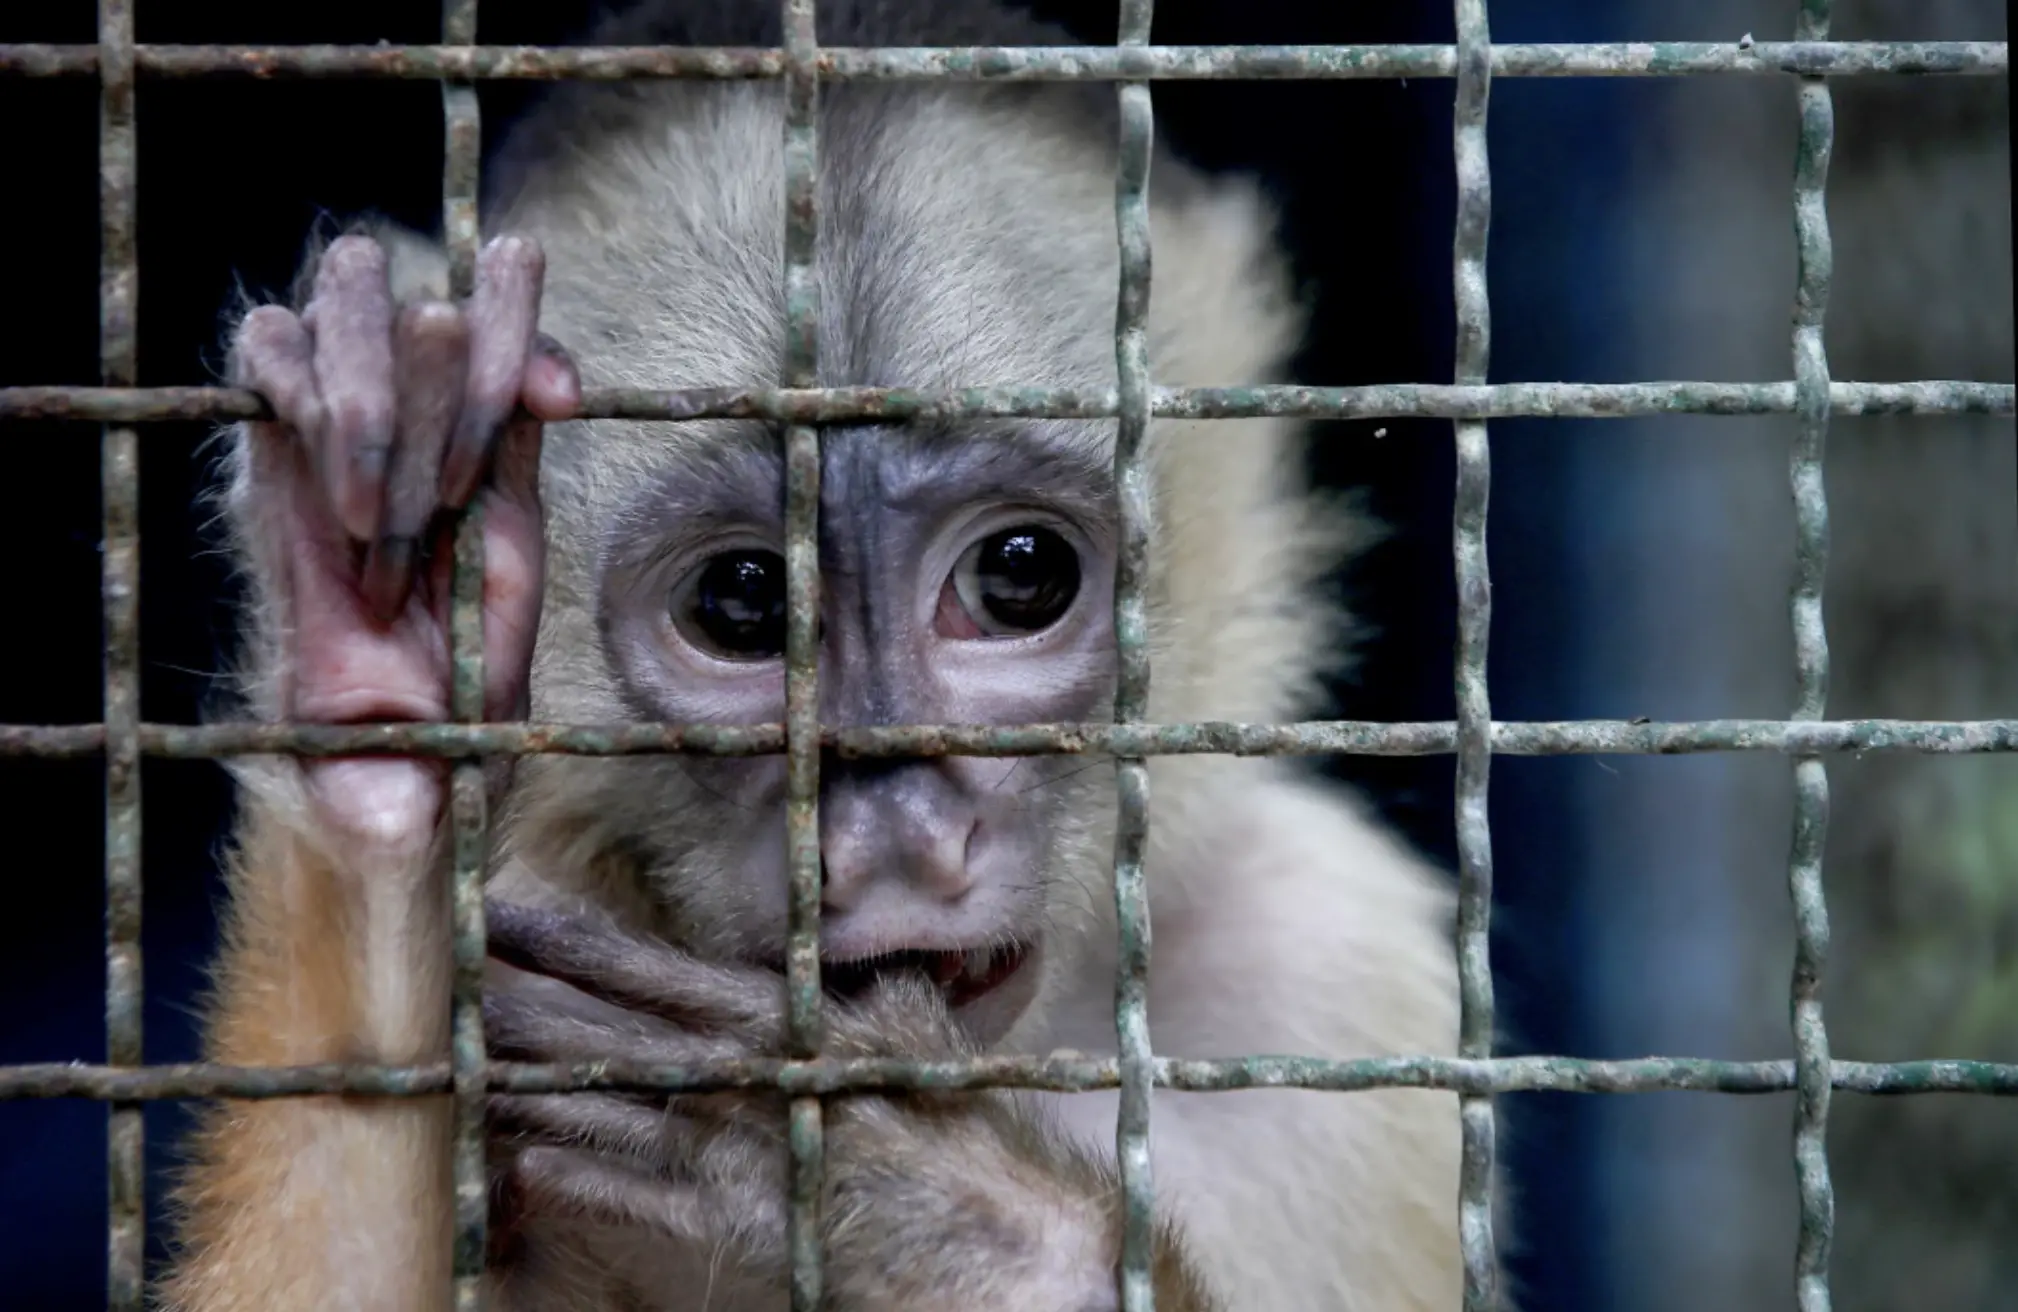  primate looks out from its cage at a wildlife research facility in Manaus, Brazil.